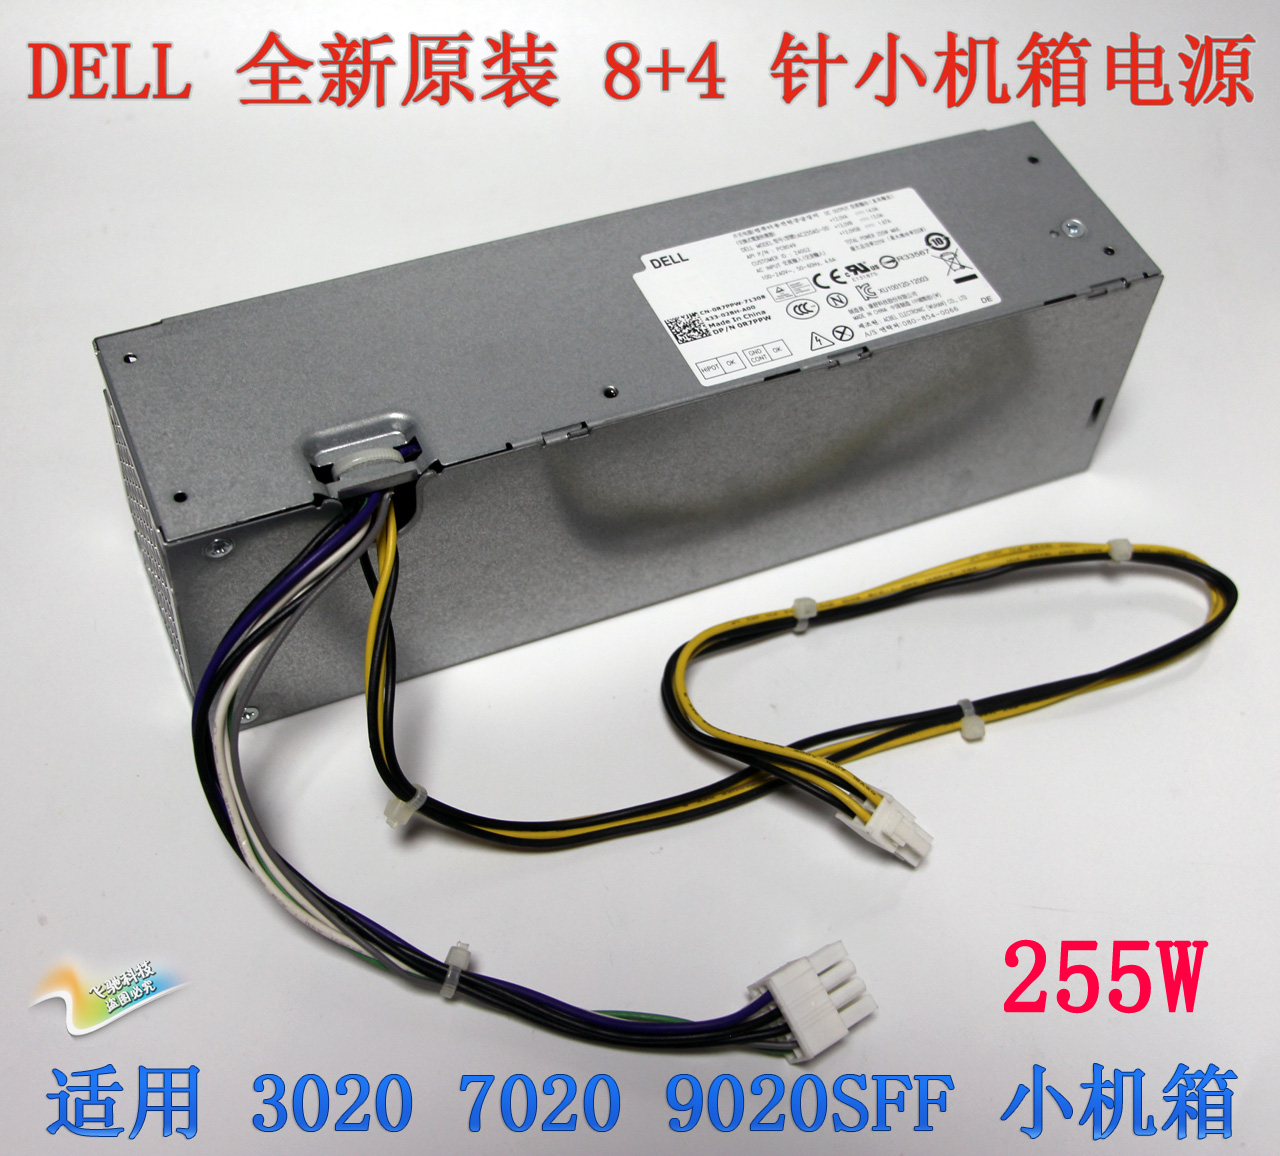 ǰ DELL 3020 7020 9020SFF     ġ L255AS-00 YH9D7 H255AS-0-